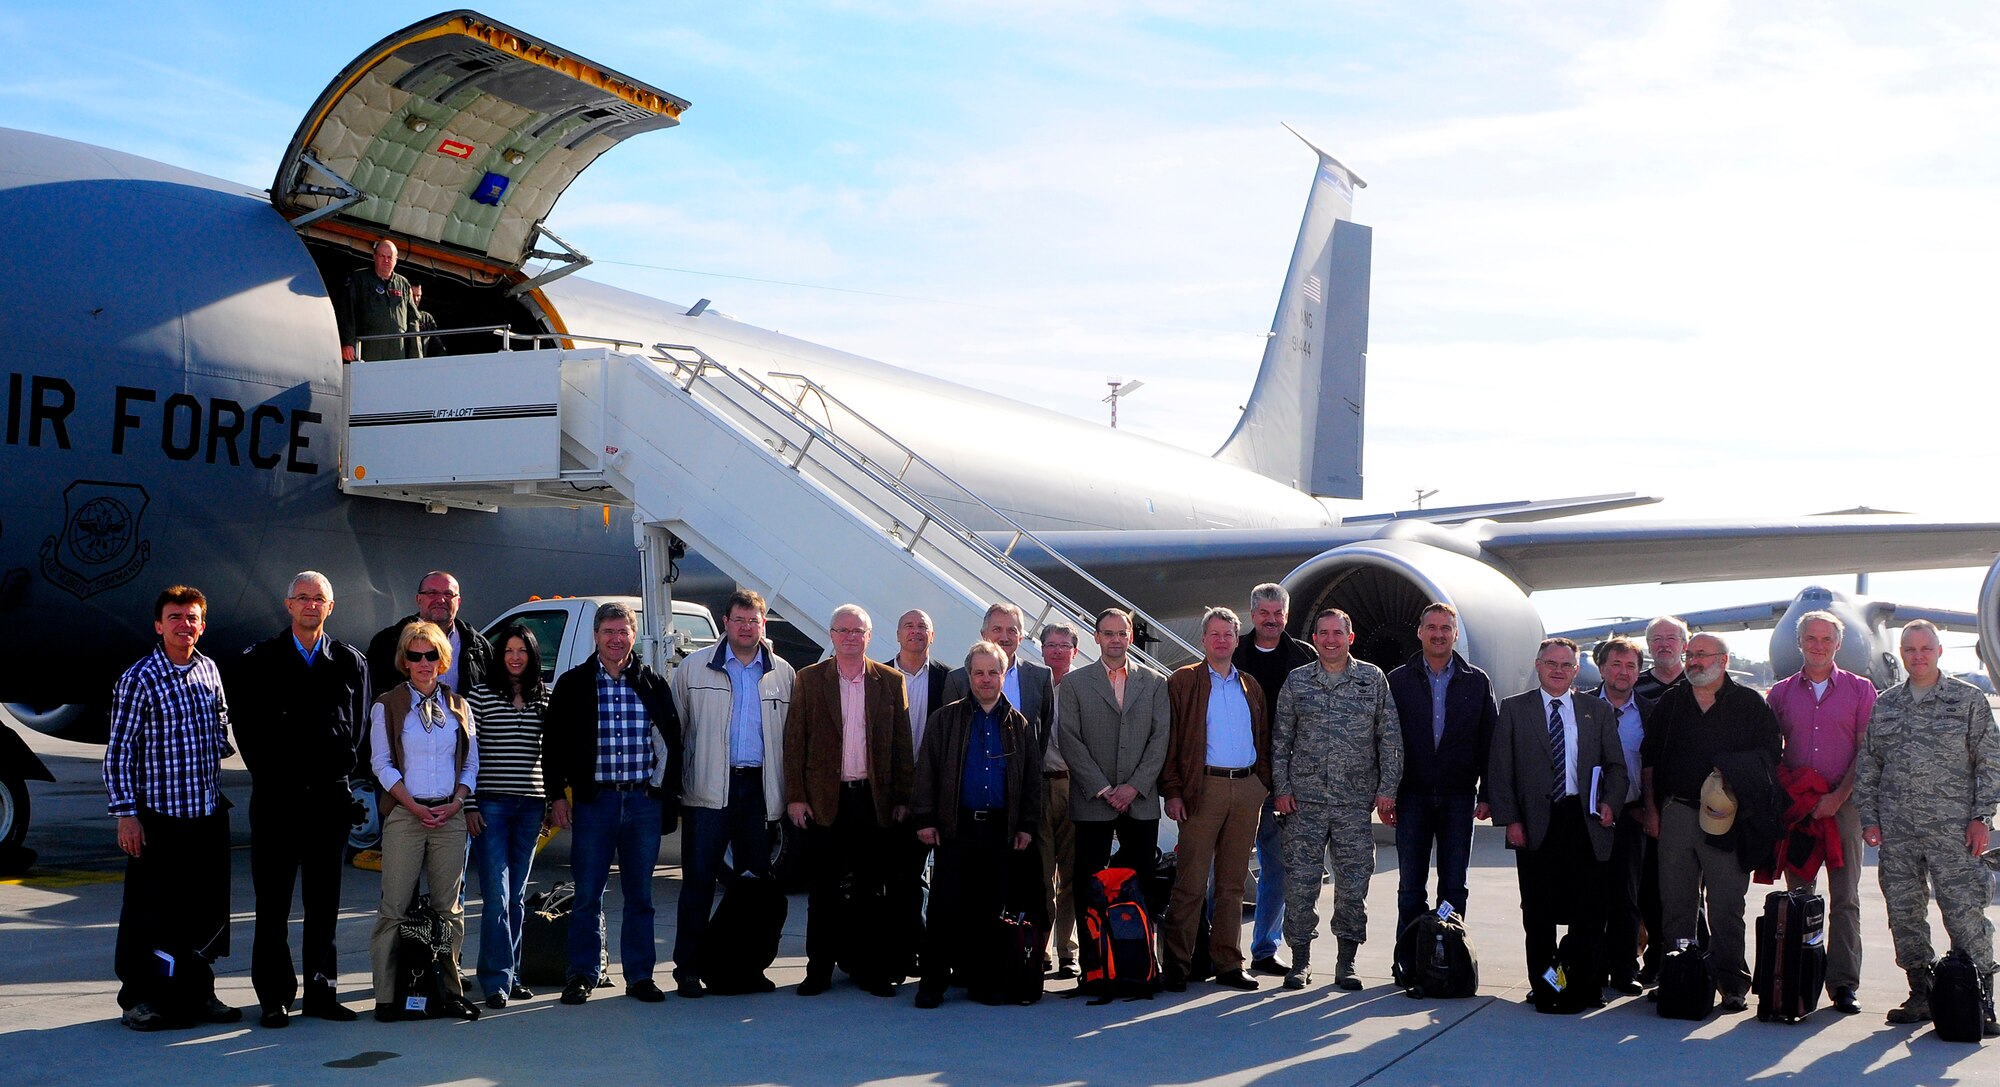 Participants of the Civic Leader Tour 2011 pose for a photo on the flightline, Ramstein Air Base, Germany, May 9, 2011. United States Air Forces in Europe vice Commander, Lt. Gen. Stephen Mueller, escorted 17 host nation civic leaders on a four-day-tour to five USAF installations to highlight Ramstein's importance to the diversity of AF missions. (U.S. Air Force Photo by Airman 1st Class Brea Miller)